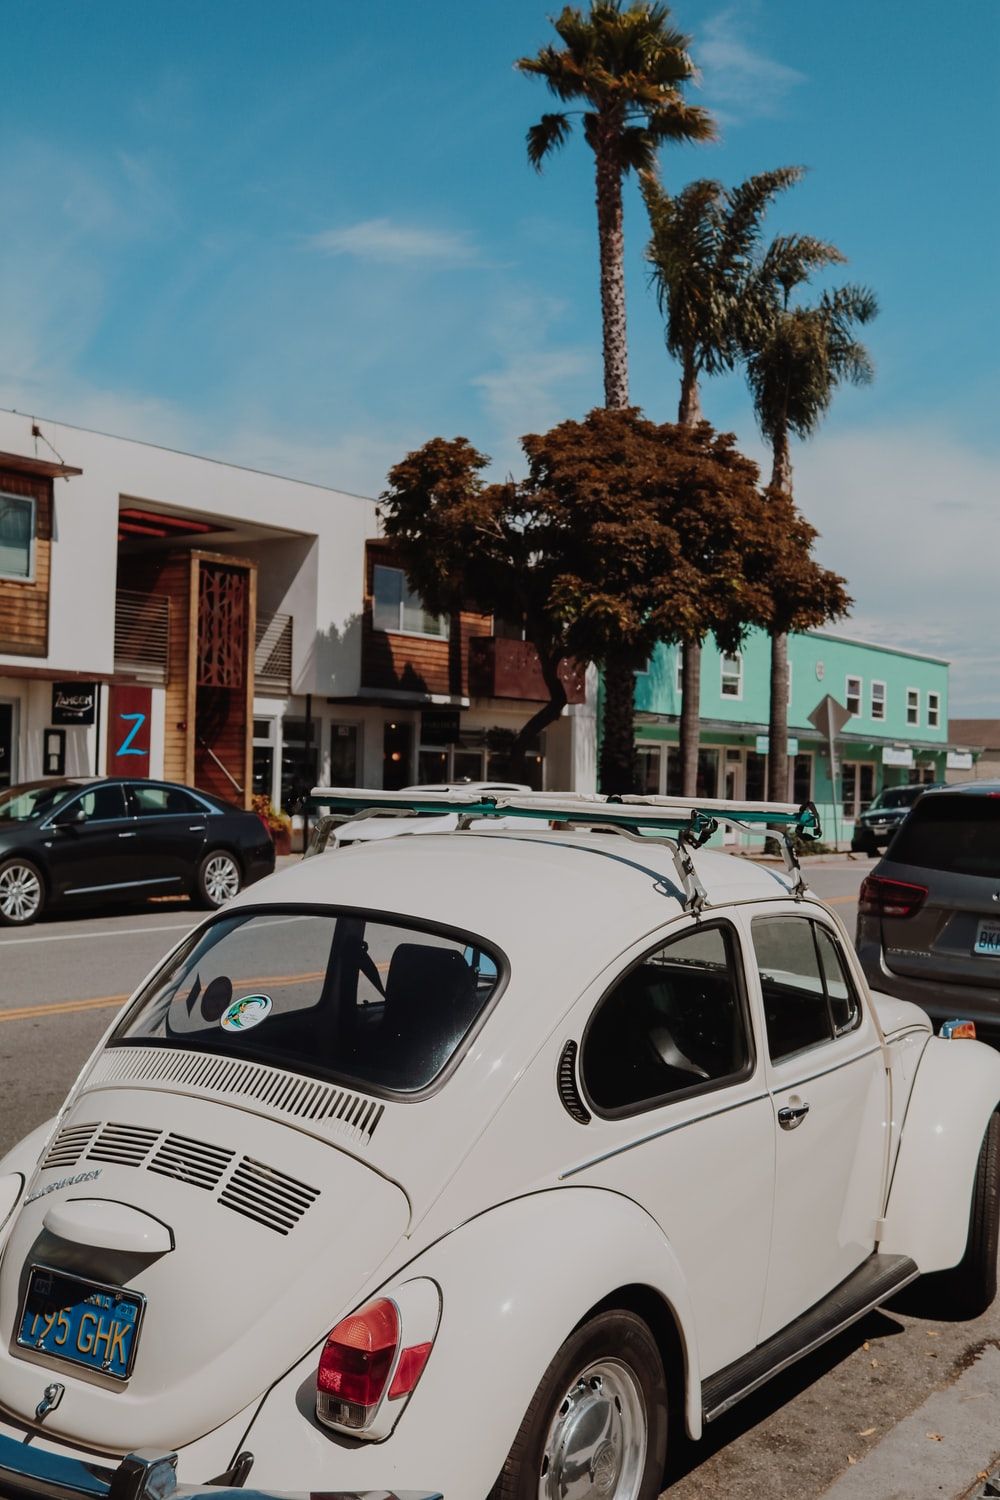 Vw Bug Picture [HD]. Download Free Image